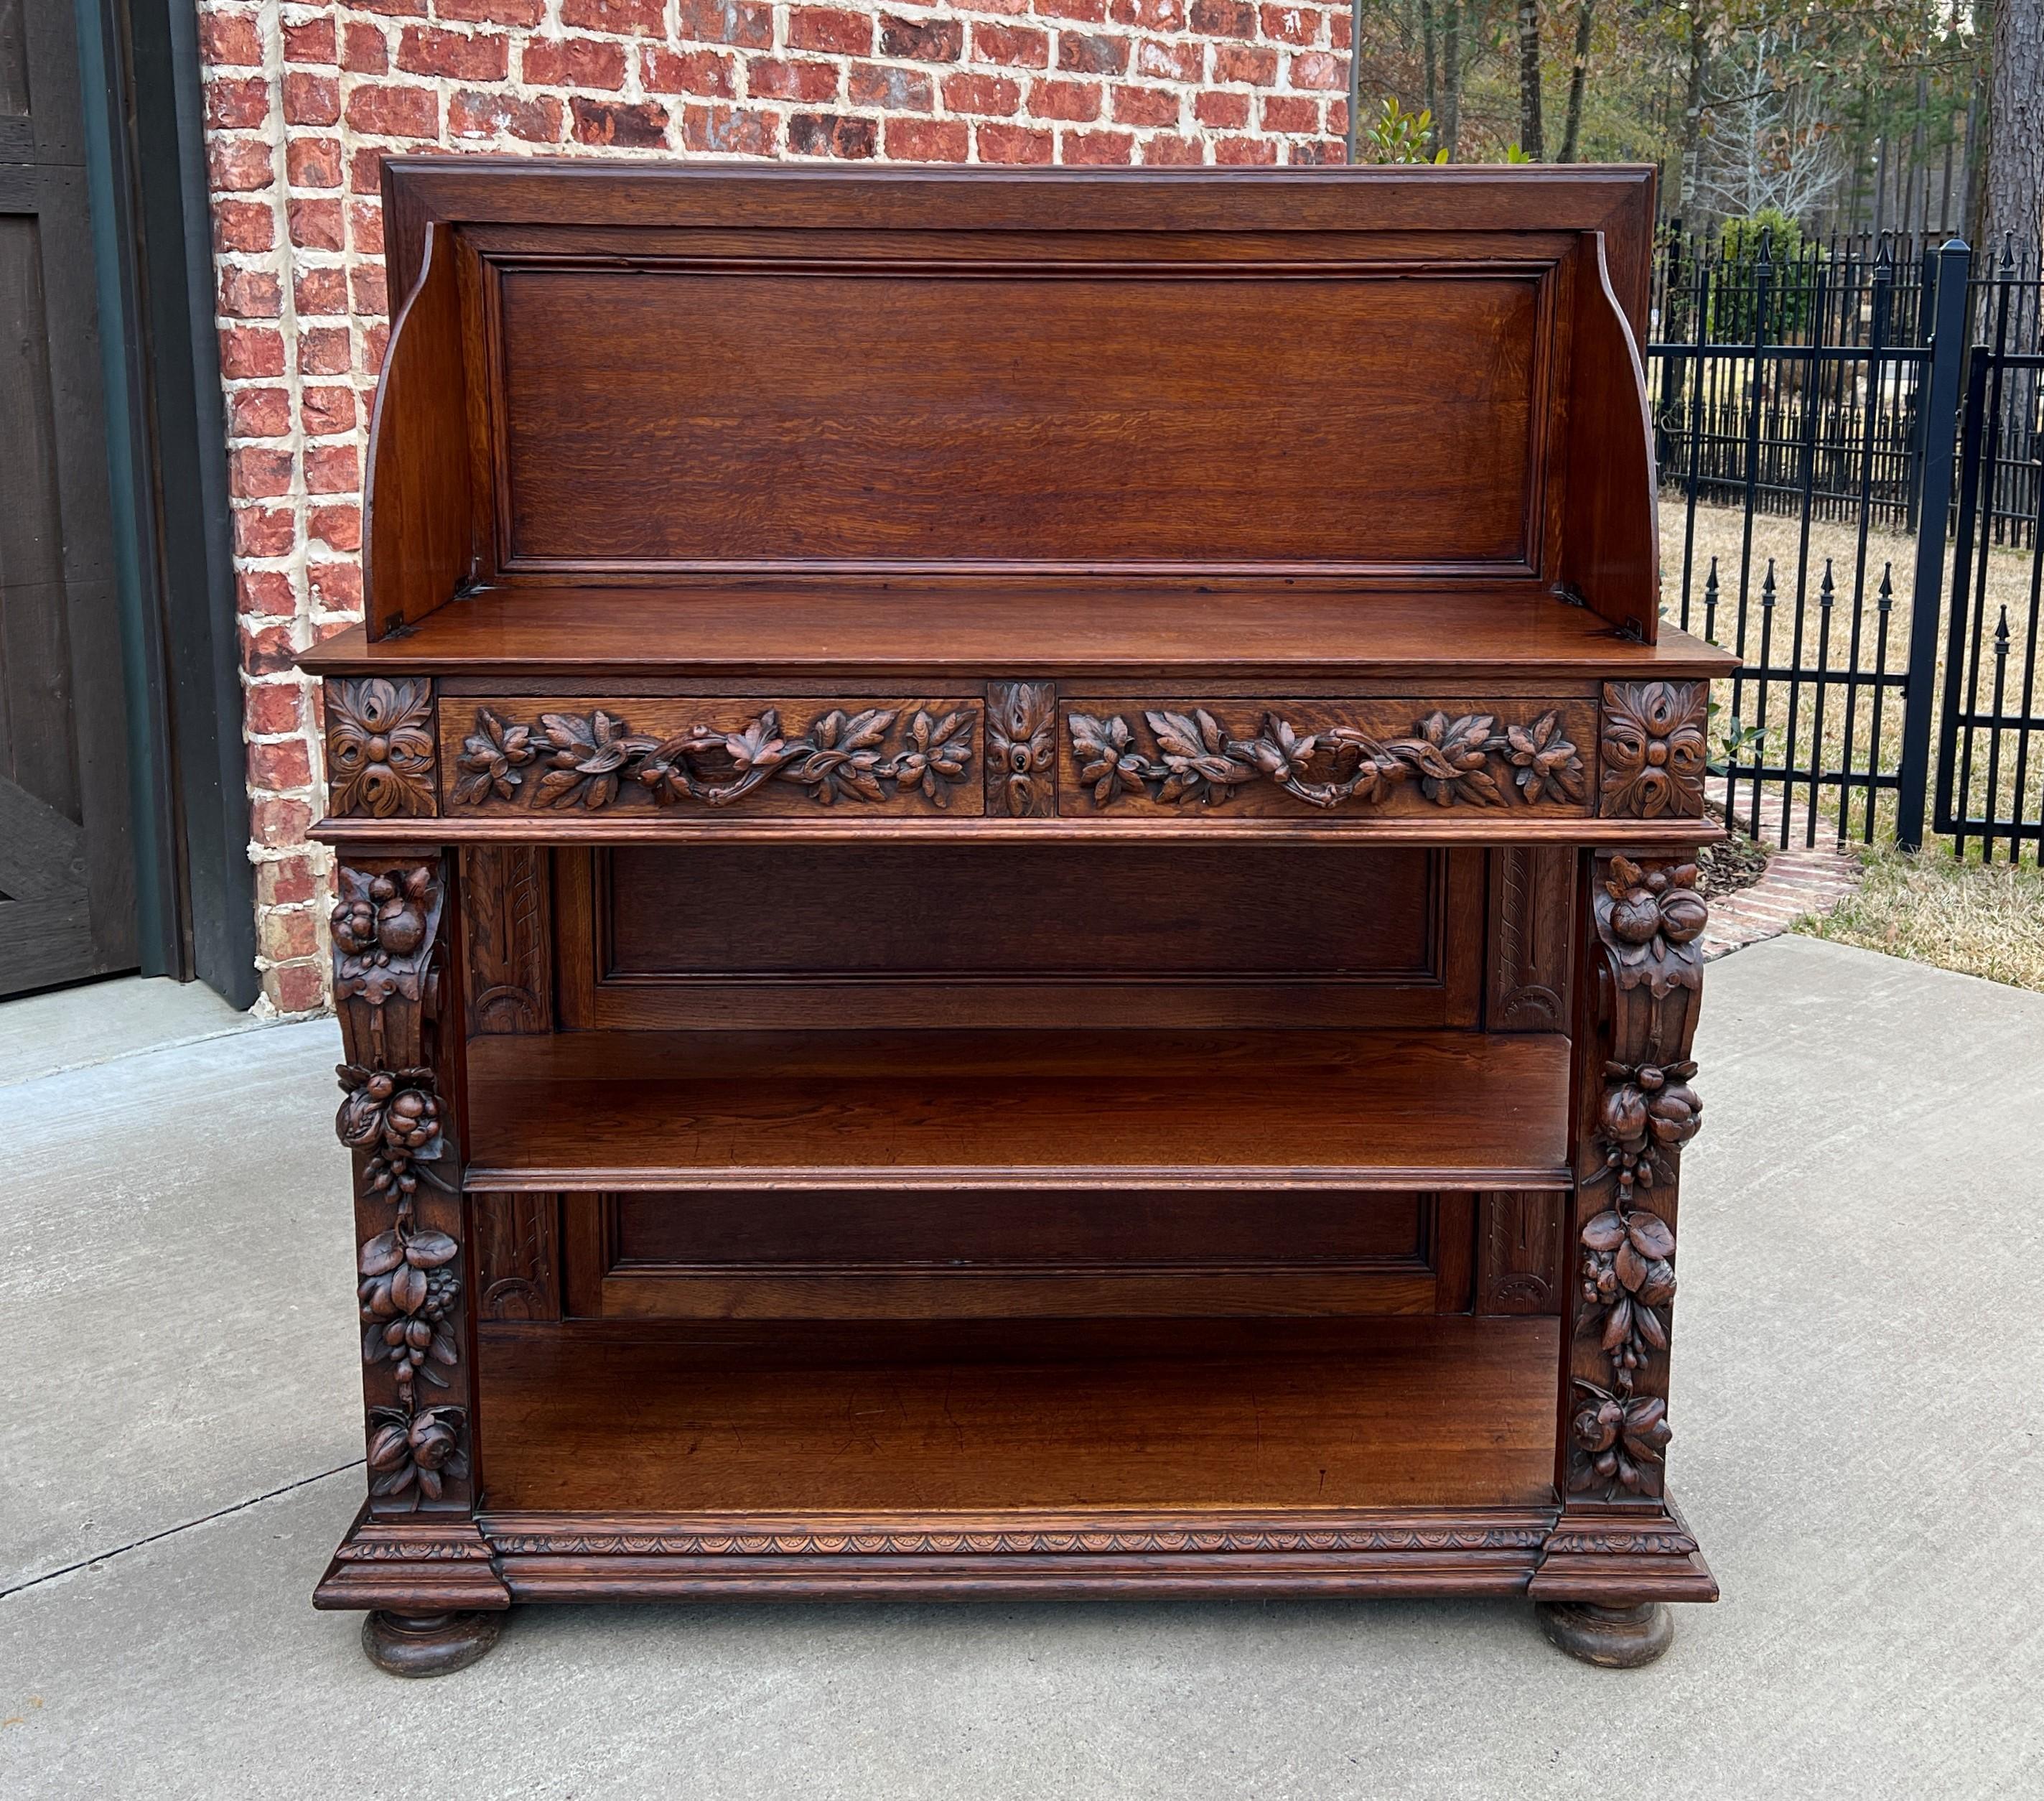 Antique French Server Sideboard Console Sofa Table 3-Tier Drawers Carved Oak 19c For Sale 3